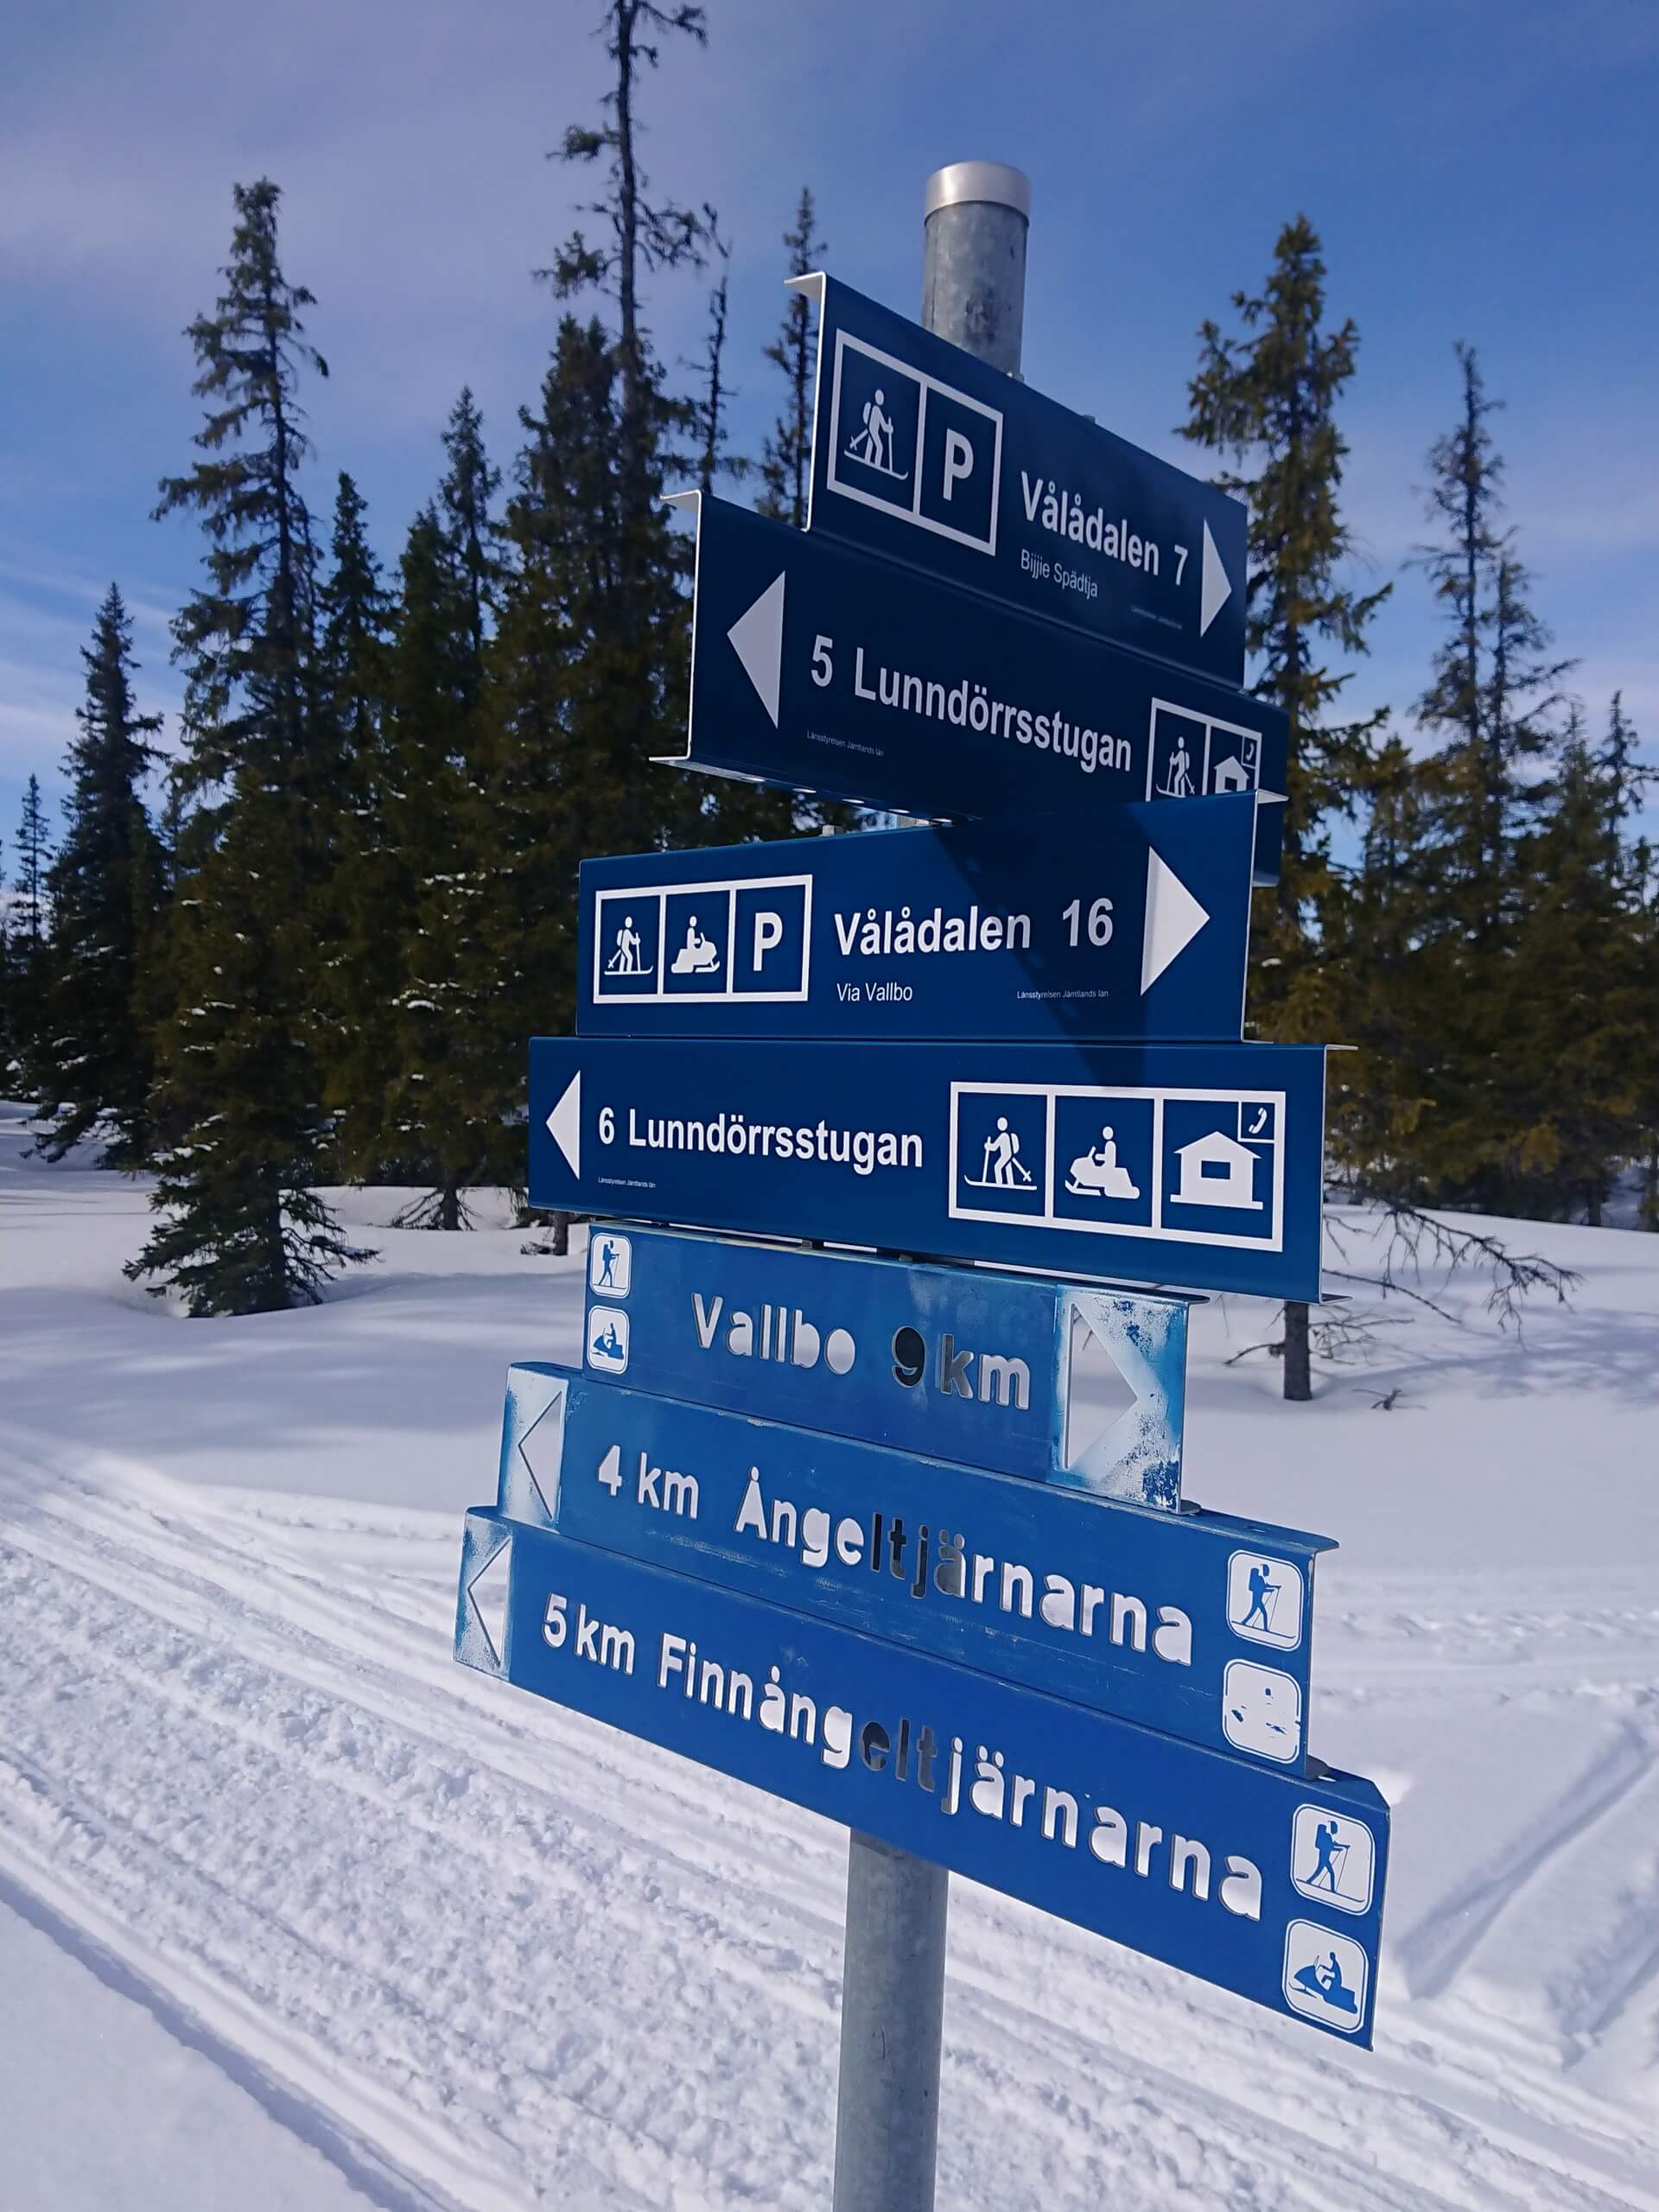 Waypoints in Sweden during the winter